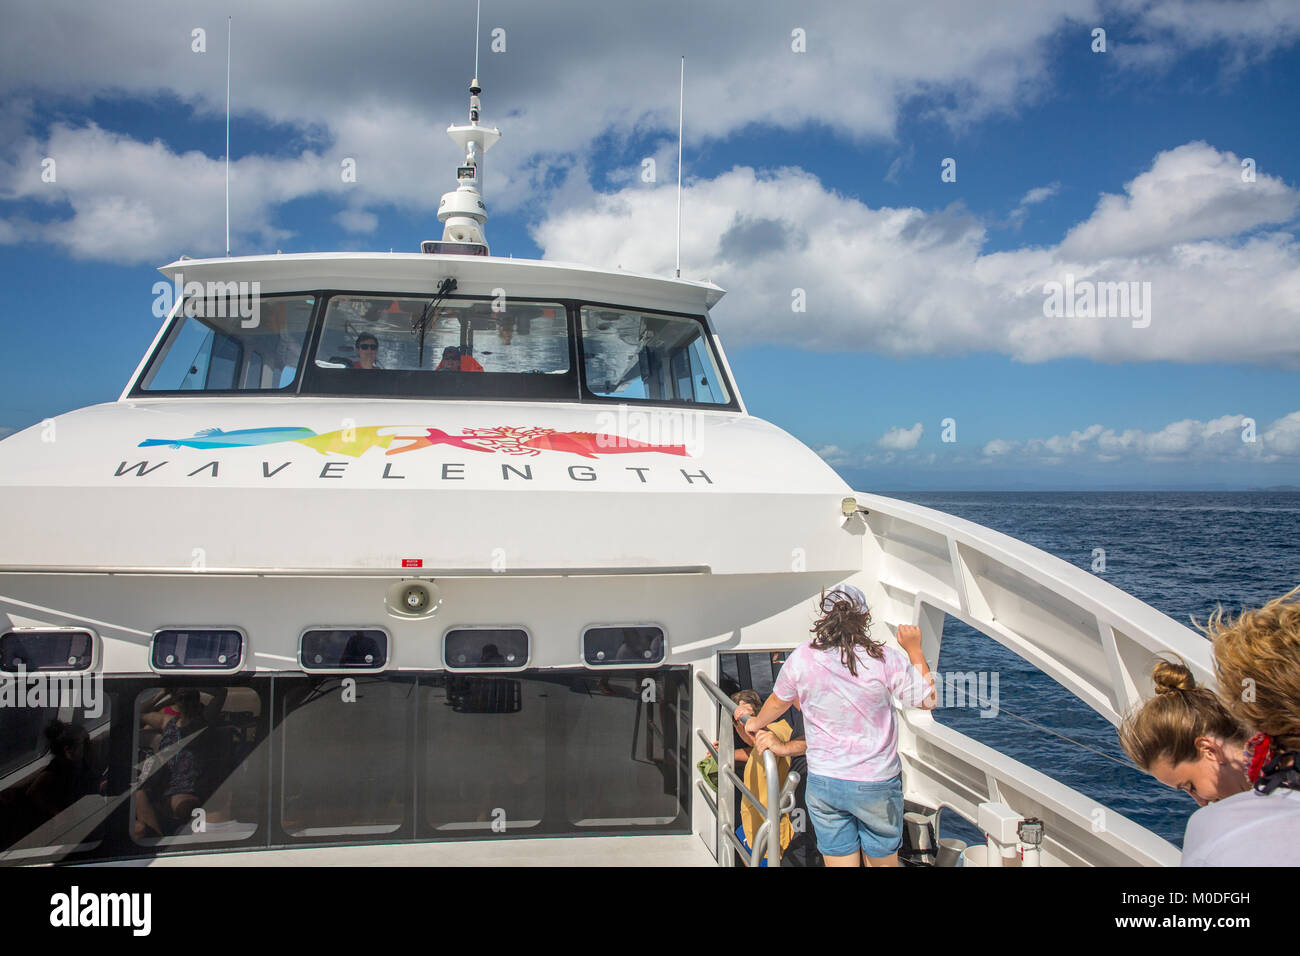 Wavelength tour boat taking people to the Great Barrier reef in Queensland,Australia Stock Photo